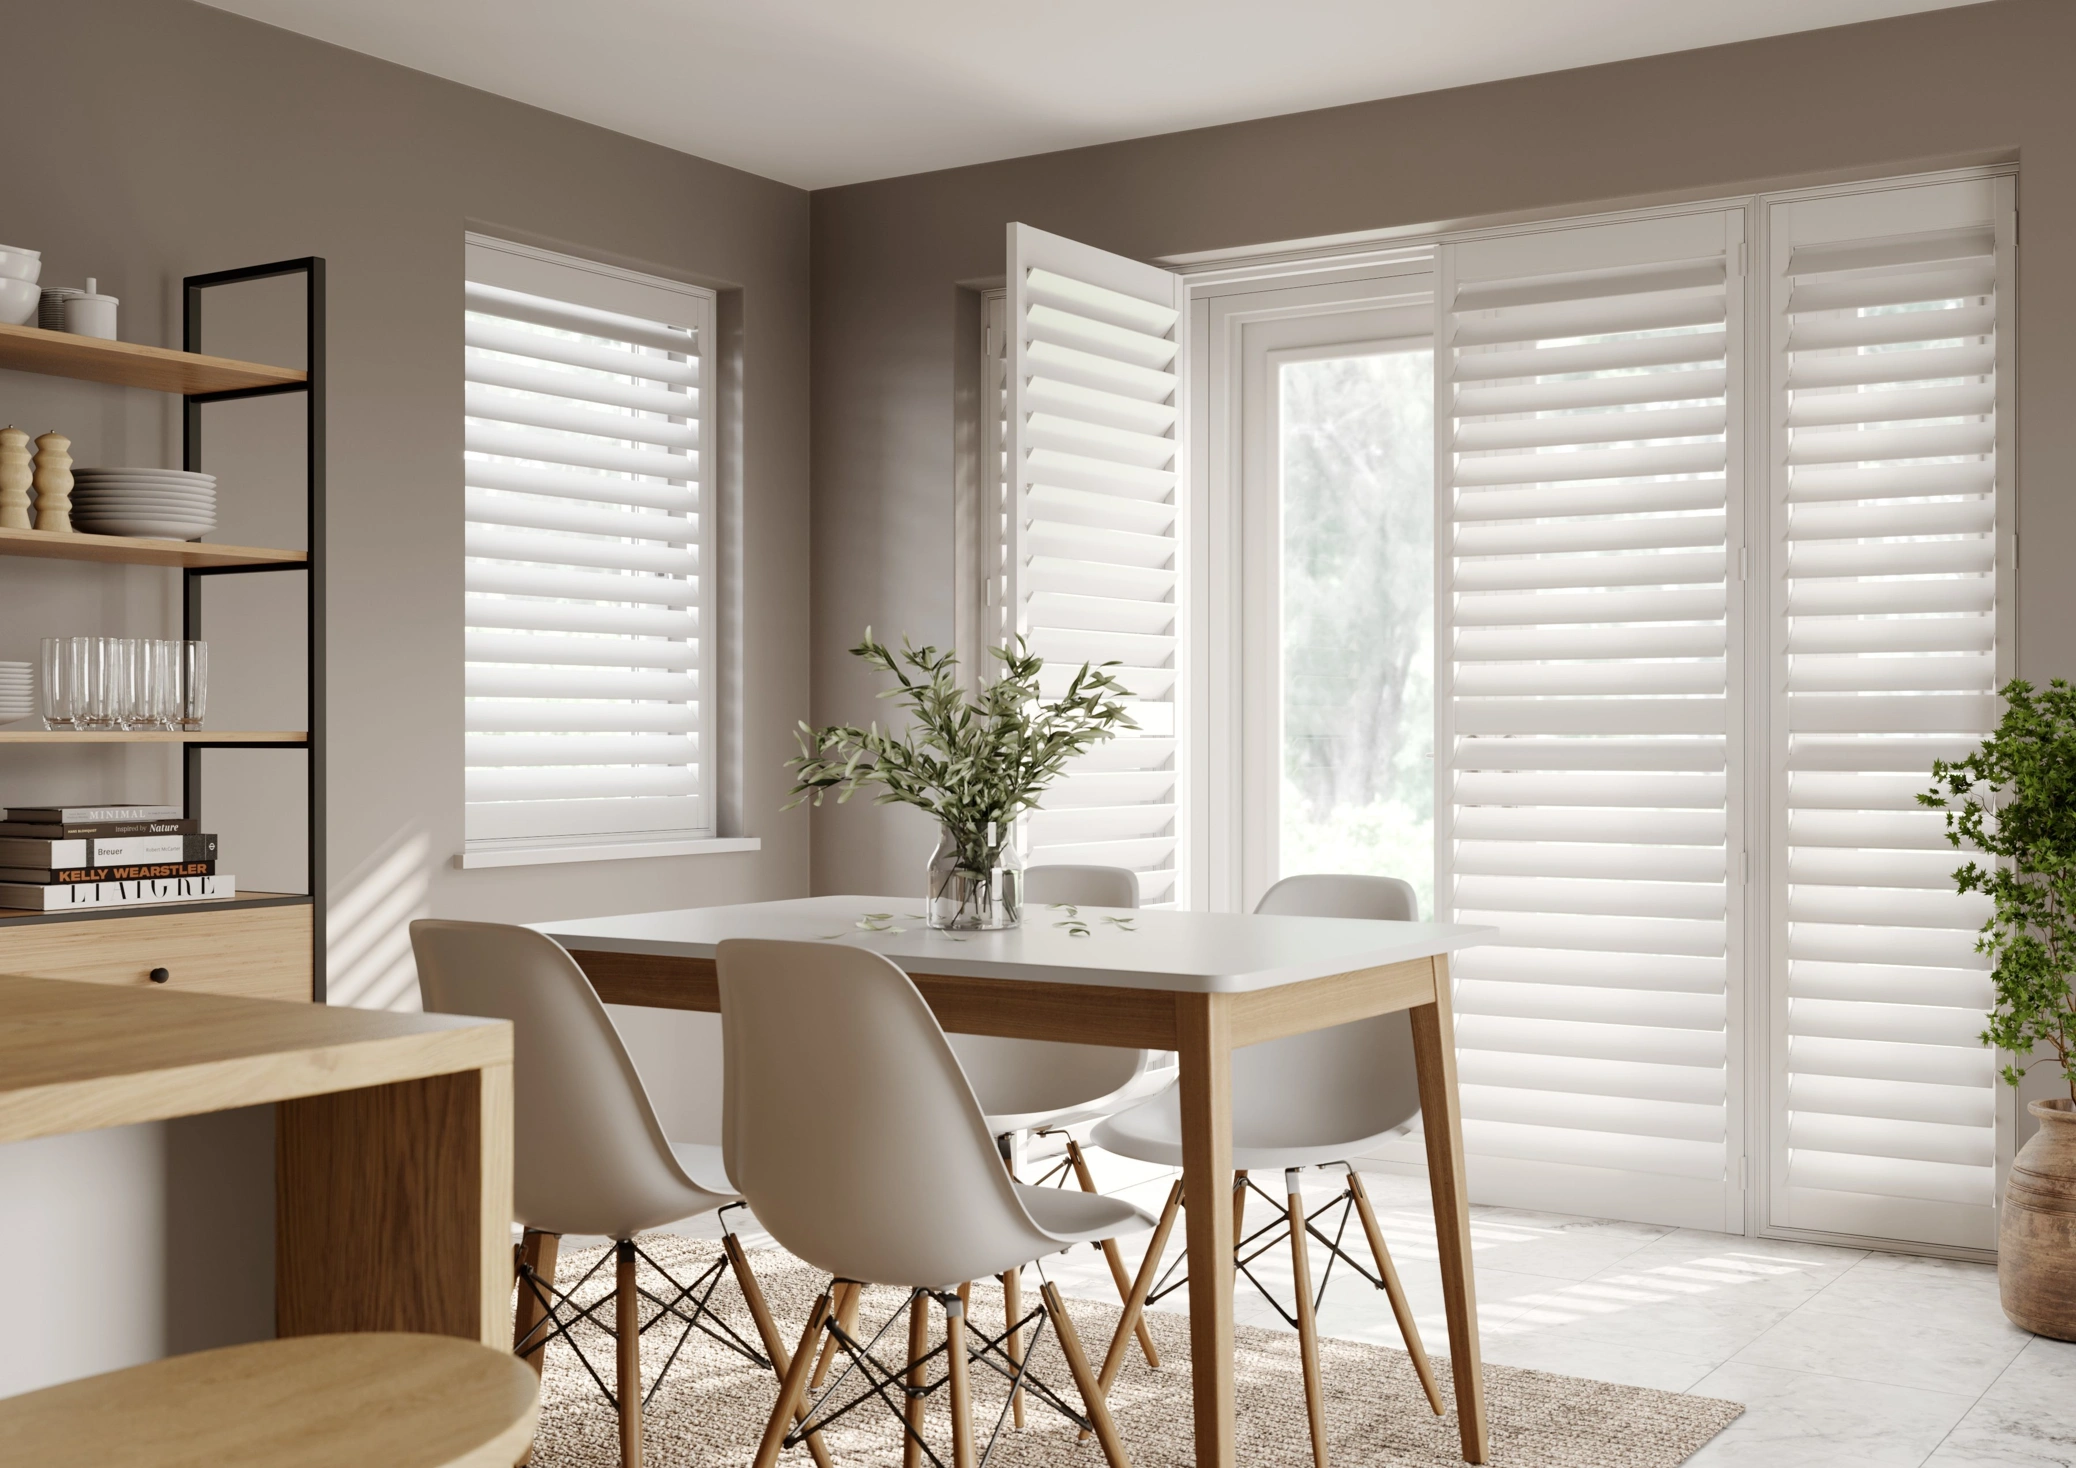 Dining room doors with Vivid White shutters